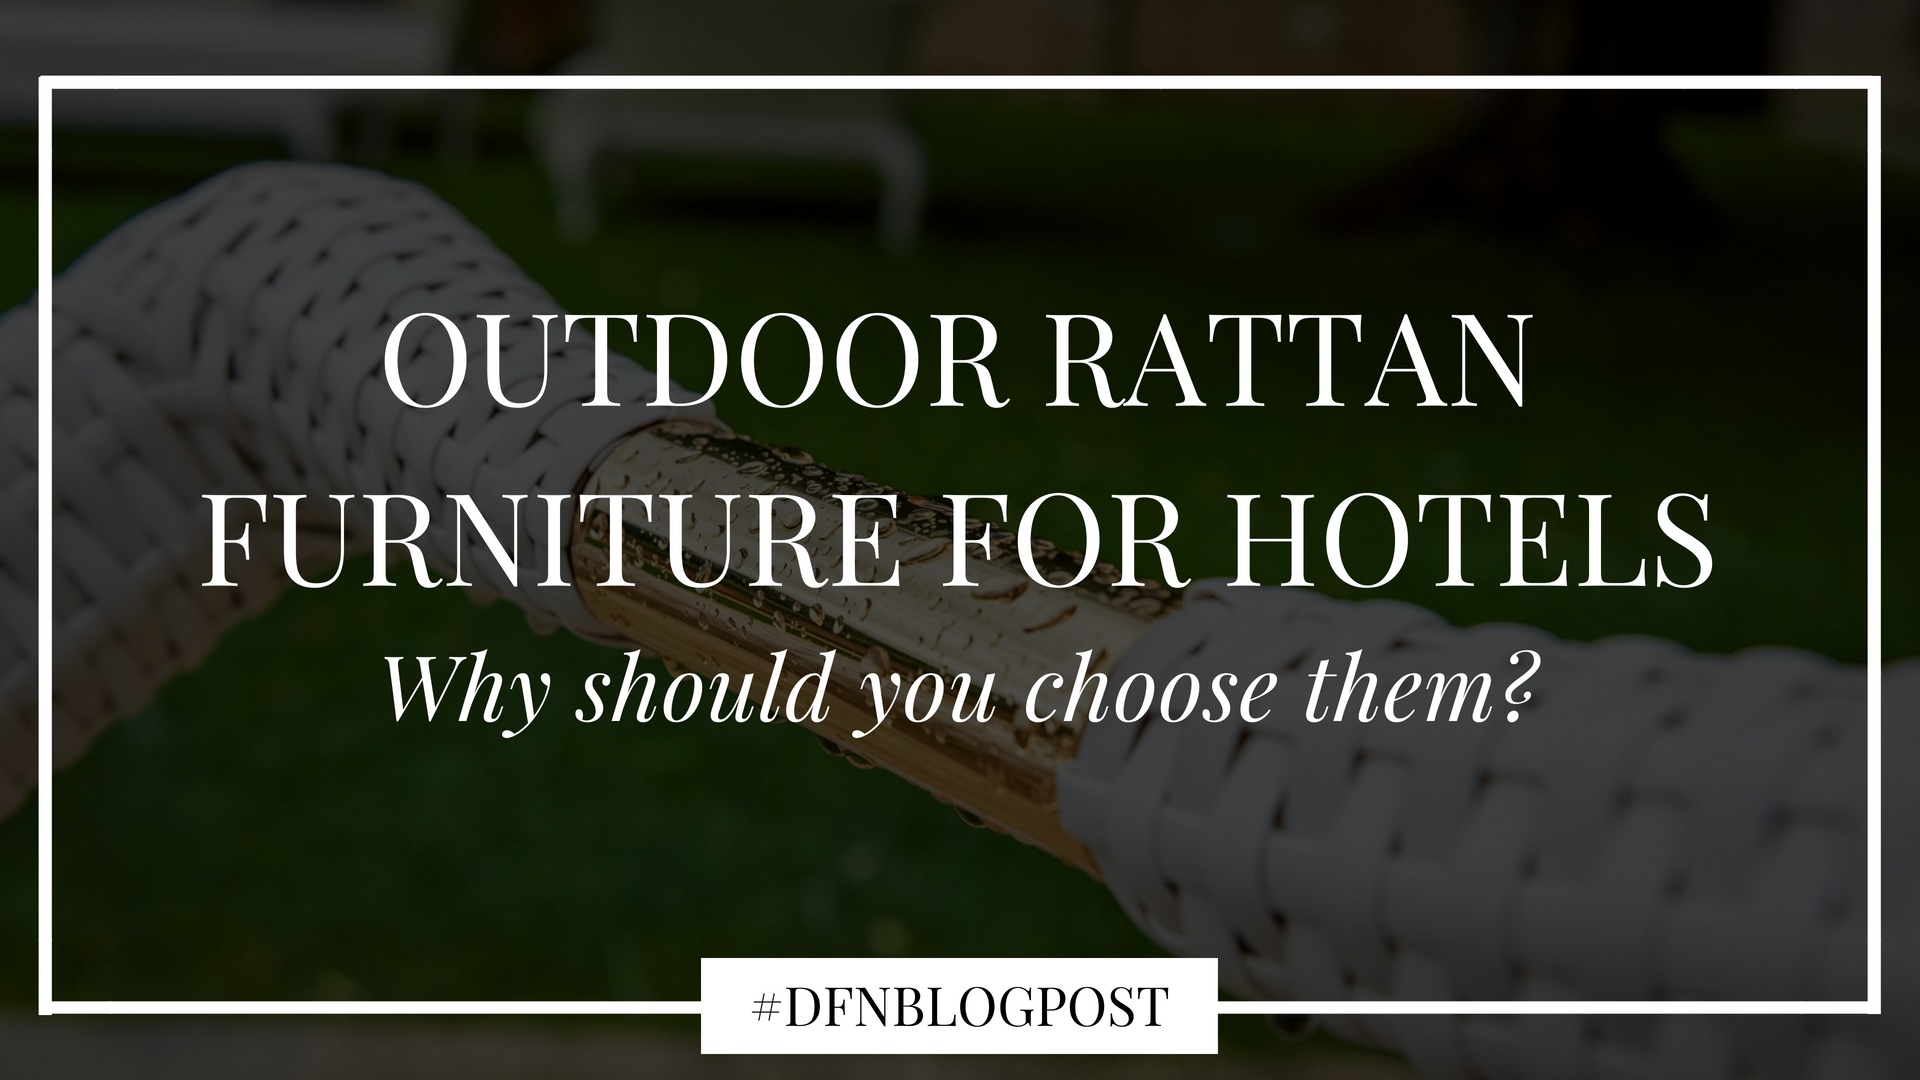 Why you should choose outdoor rattan furniture for hotels